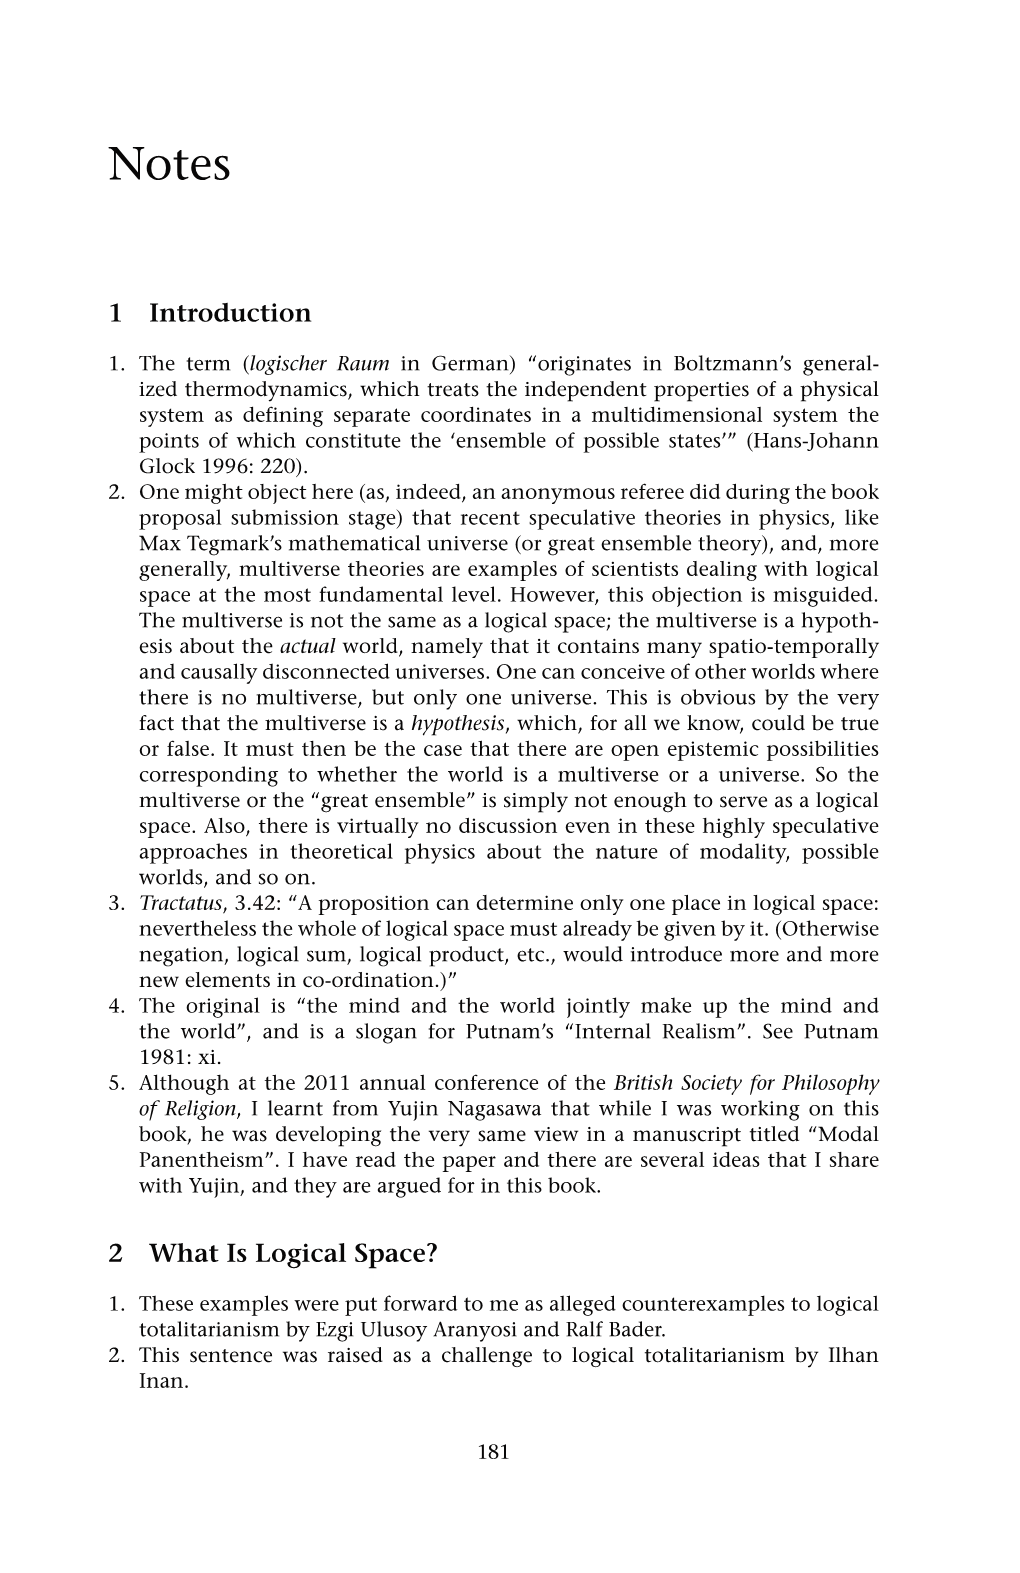 1 Introduction 2 What Is Logical Space?